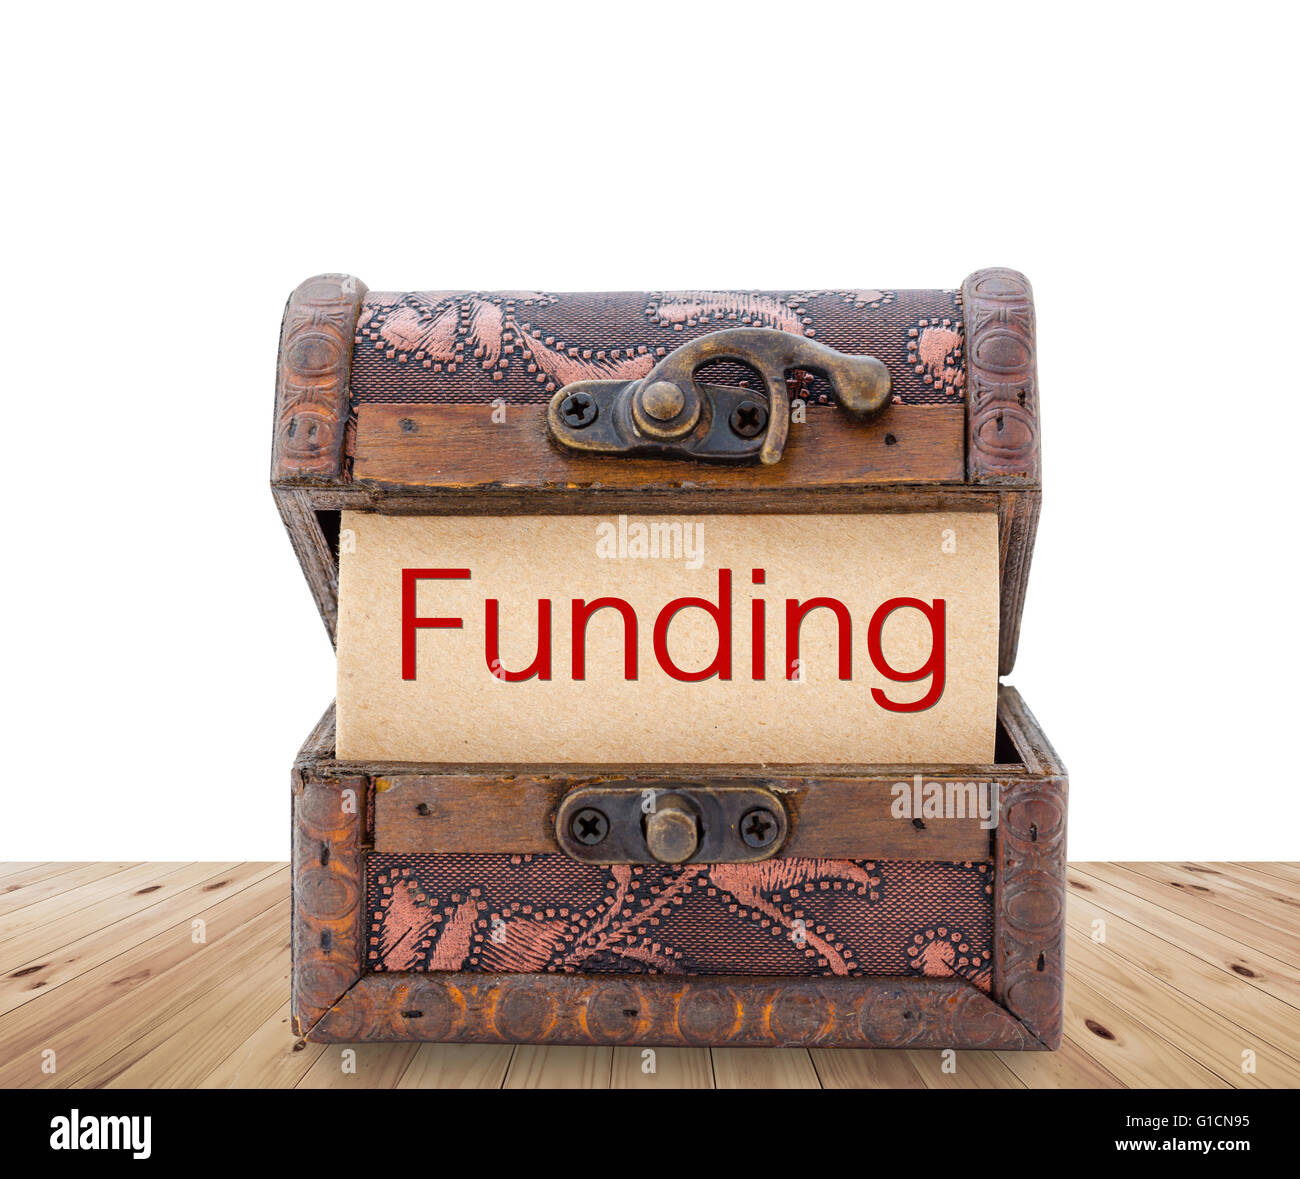 Funding word on paper in treasure chest. Business concept. Stock Photo